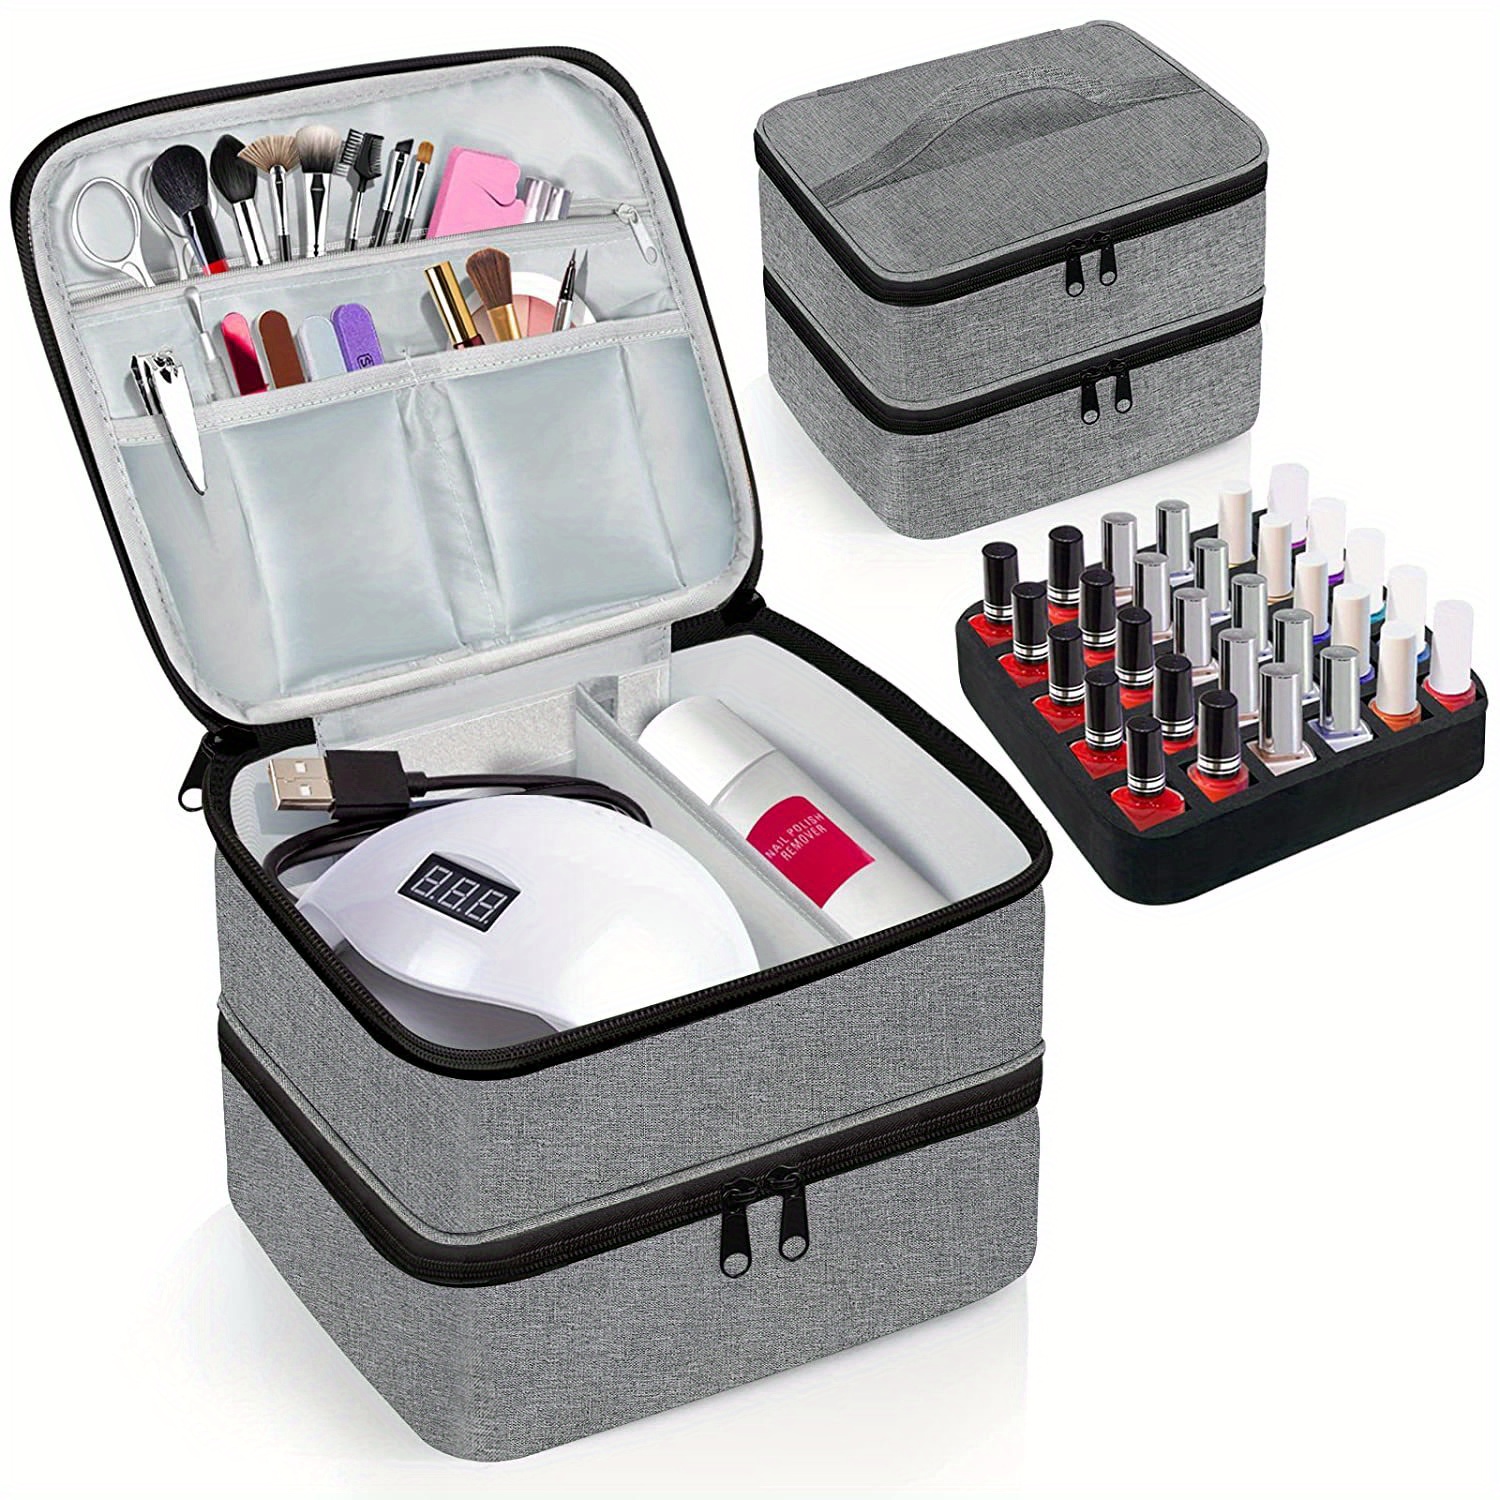 Byootique Double Layer Nail Polish Carrying Case Nail Organizer with 2 Removable Transparent Bags for Manicurists Nail Technicians Makeup Artists, Bri